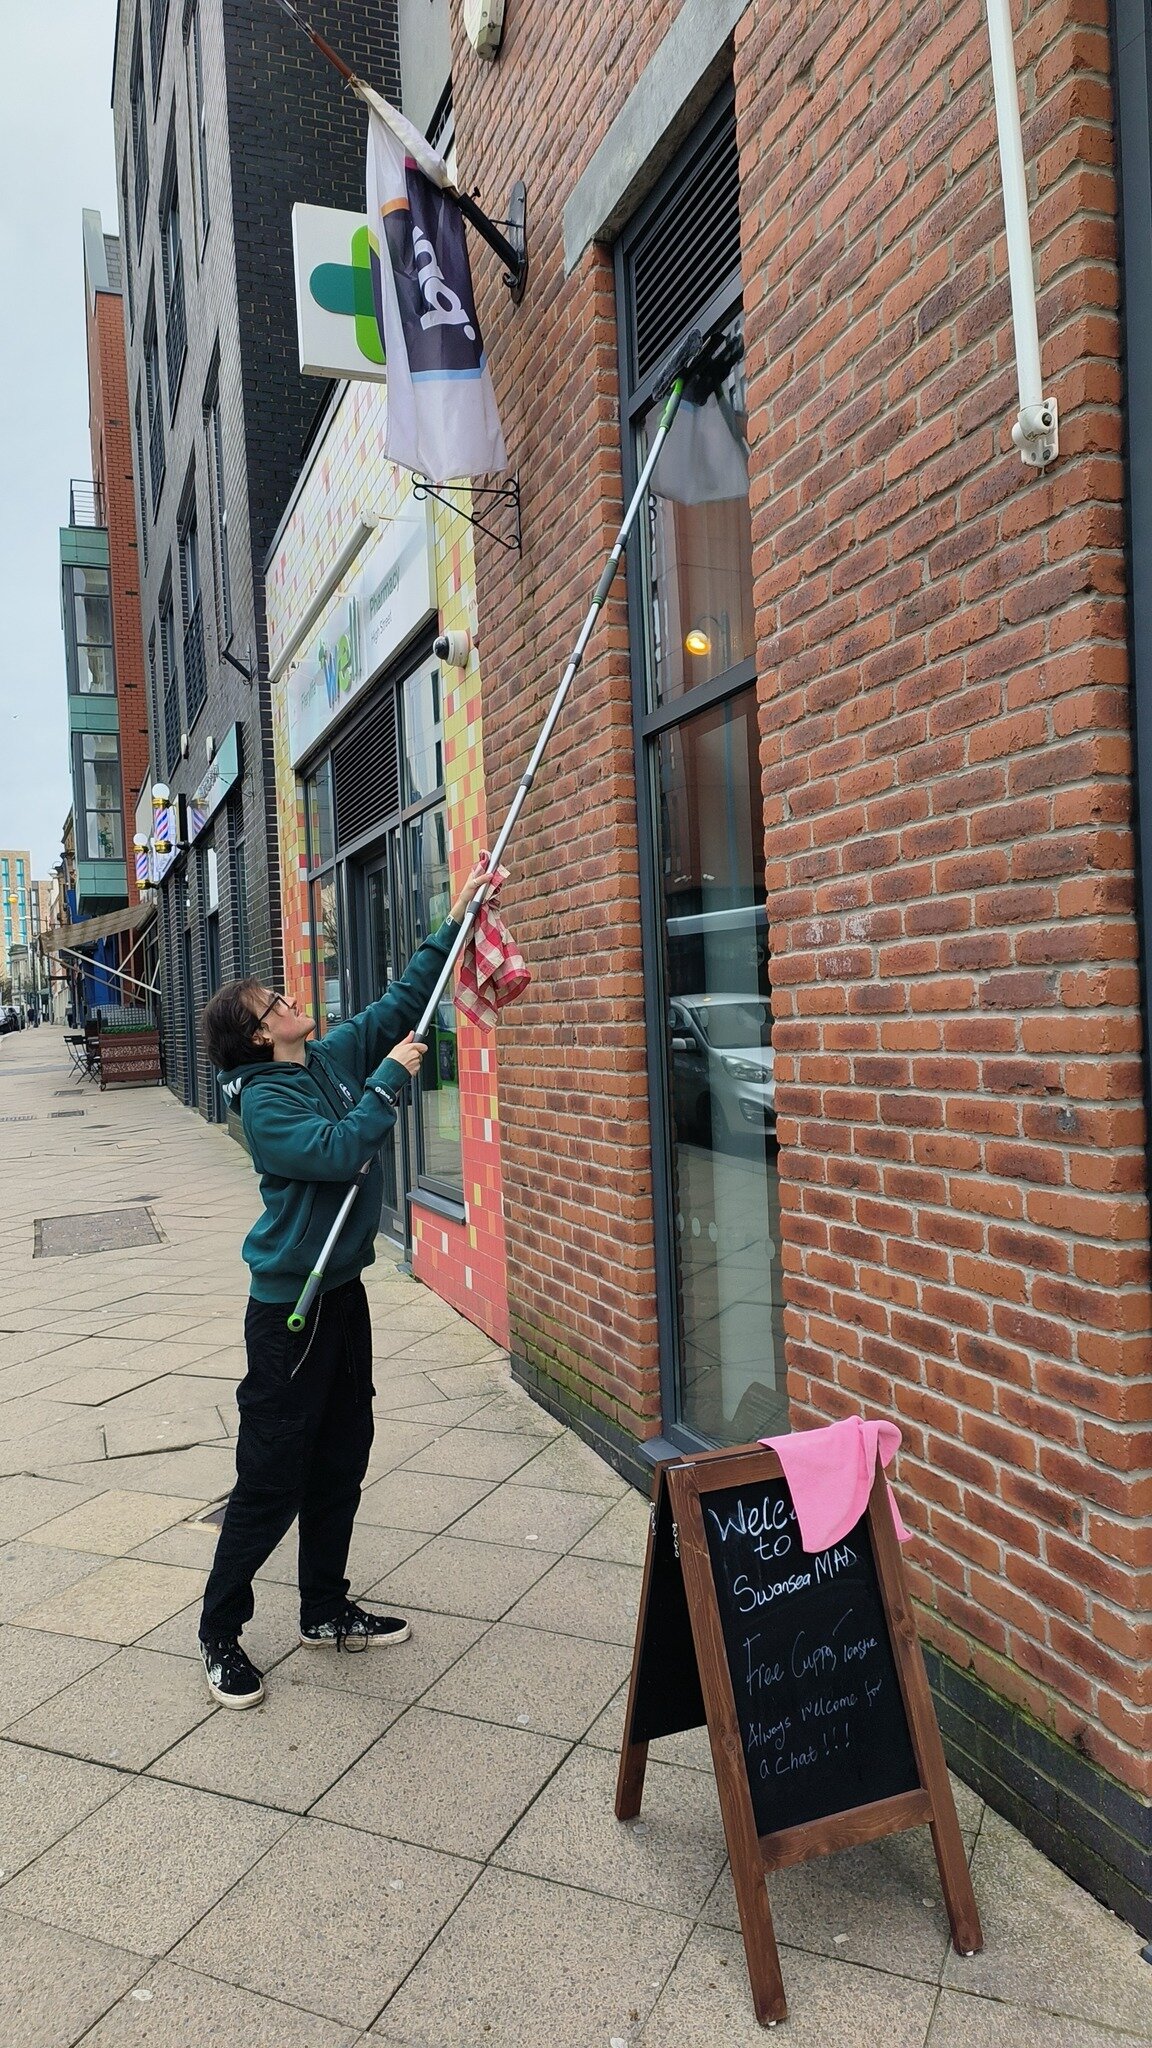 HELLO WINDOW CLEANING 
Thank's to Swansea MAD for giving me a go on their windows the last few months as part of their weekly service. Think i'm going to try and add this to my service once my own squeegee is purchased. 🪣🪒🧽